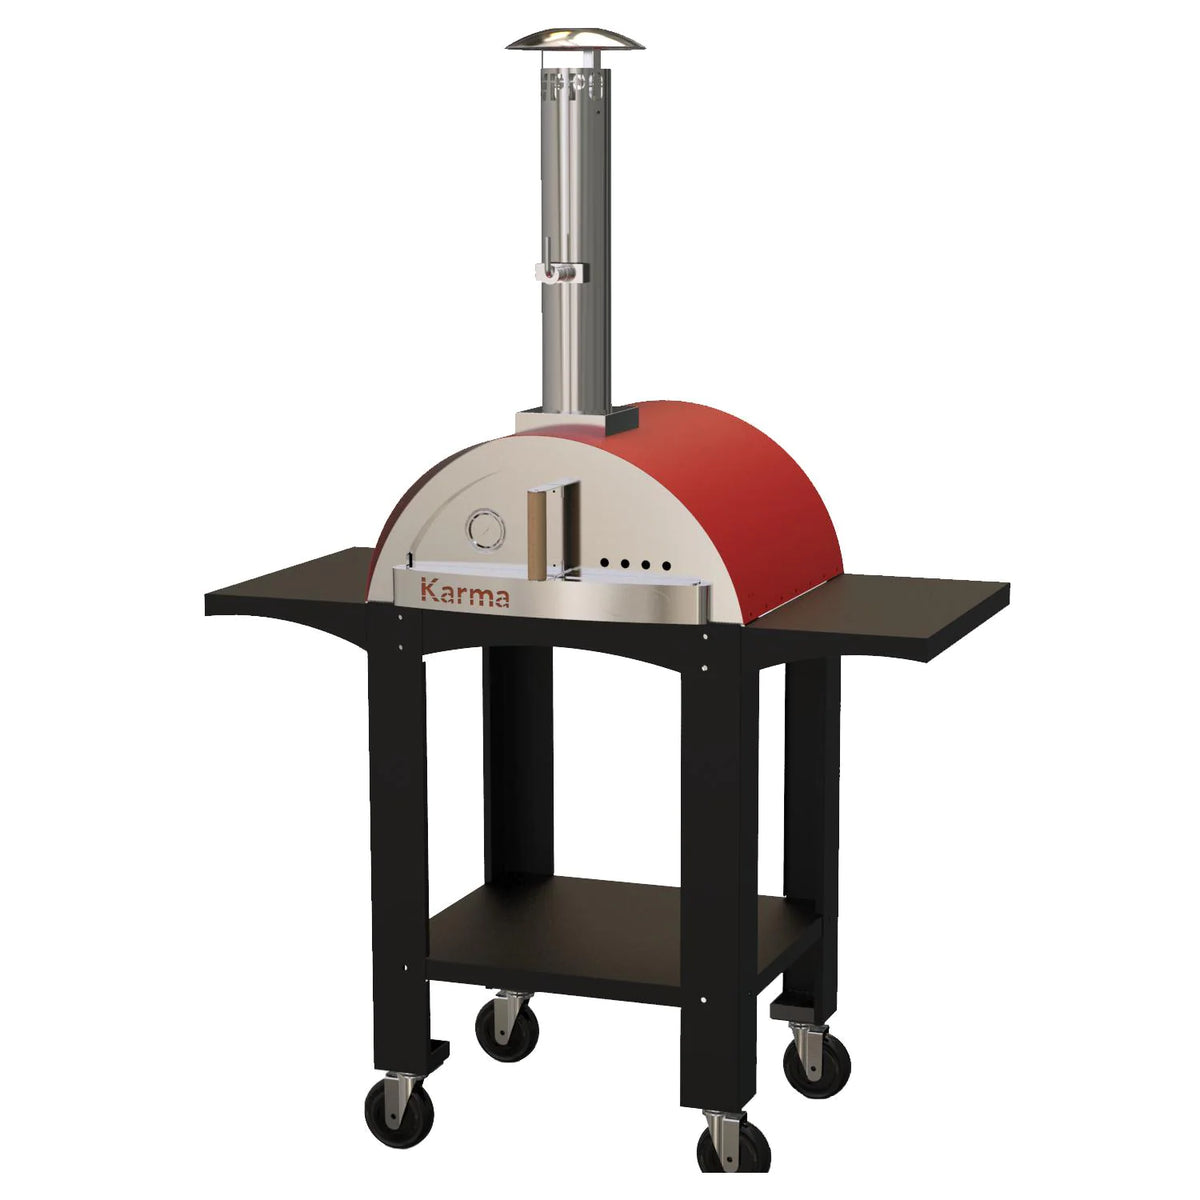 WPPO Karma 25 Inch Stainless Steel Wood Fired Freestanding Outdoor Pizza Oven Red Front View